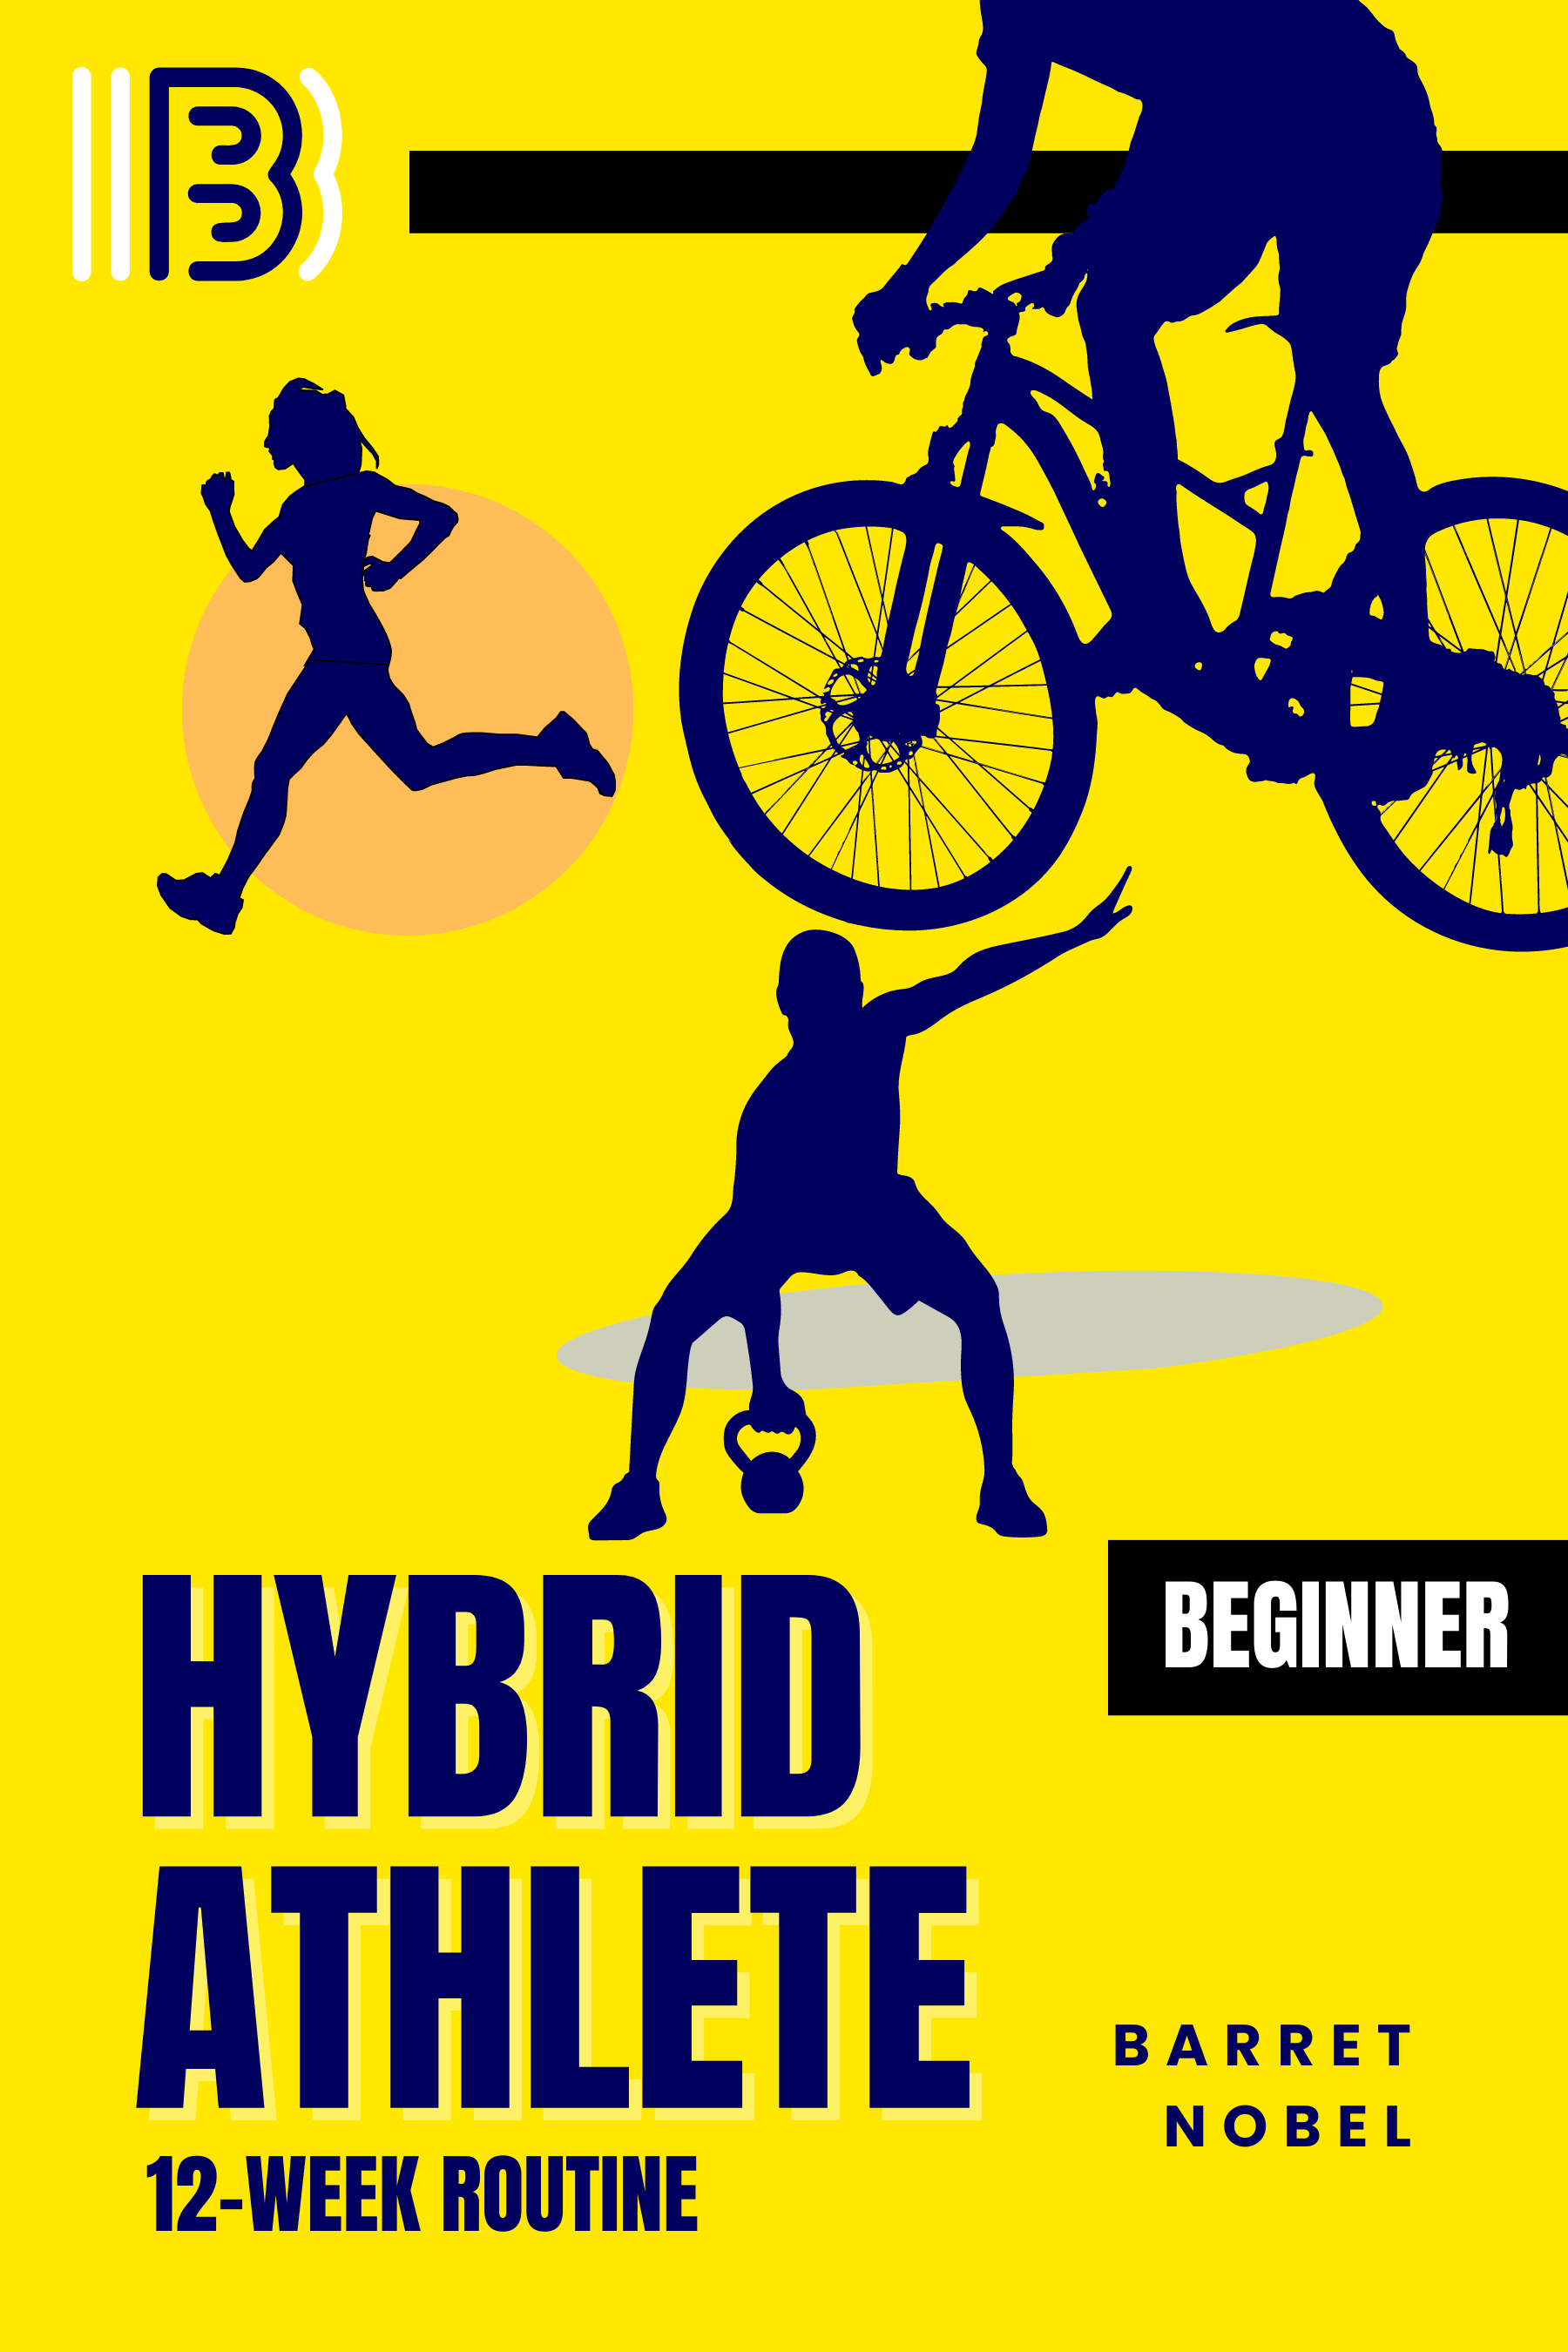 Revolutionize Your Workout: The Best Strength Training Routine for Hybrid Athletes